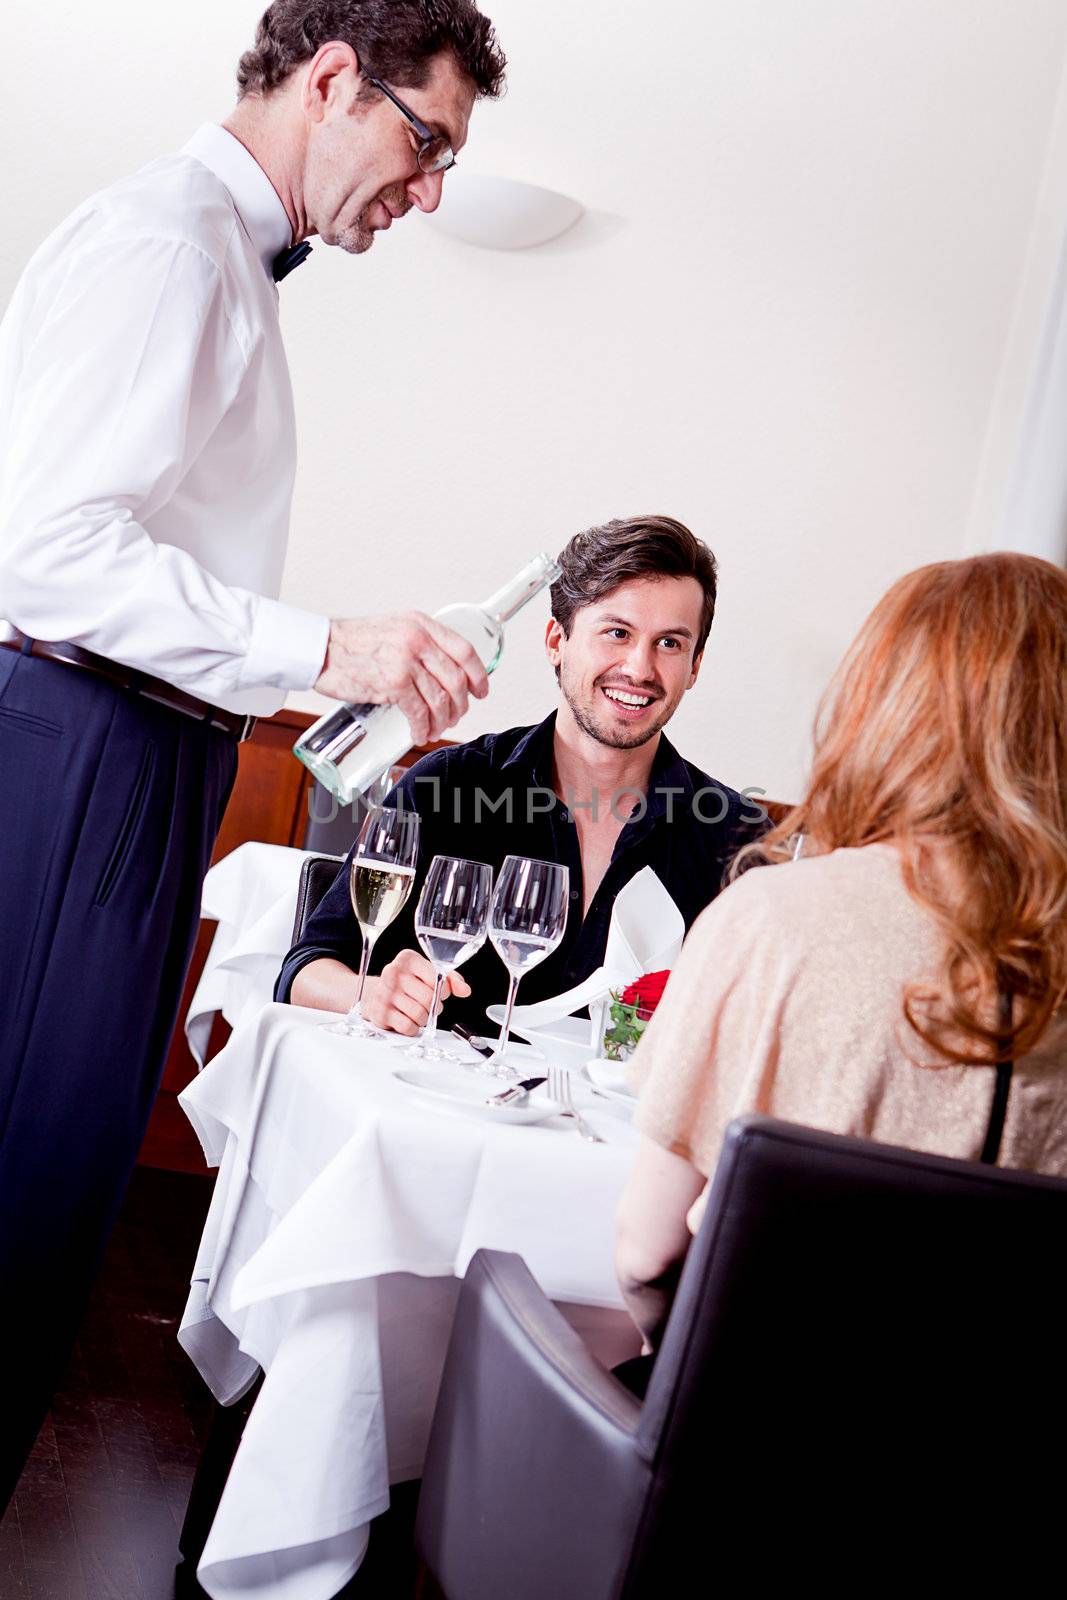 man and woman for dinner in restaurant by juniart